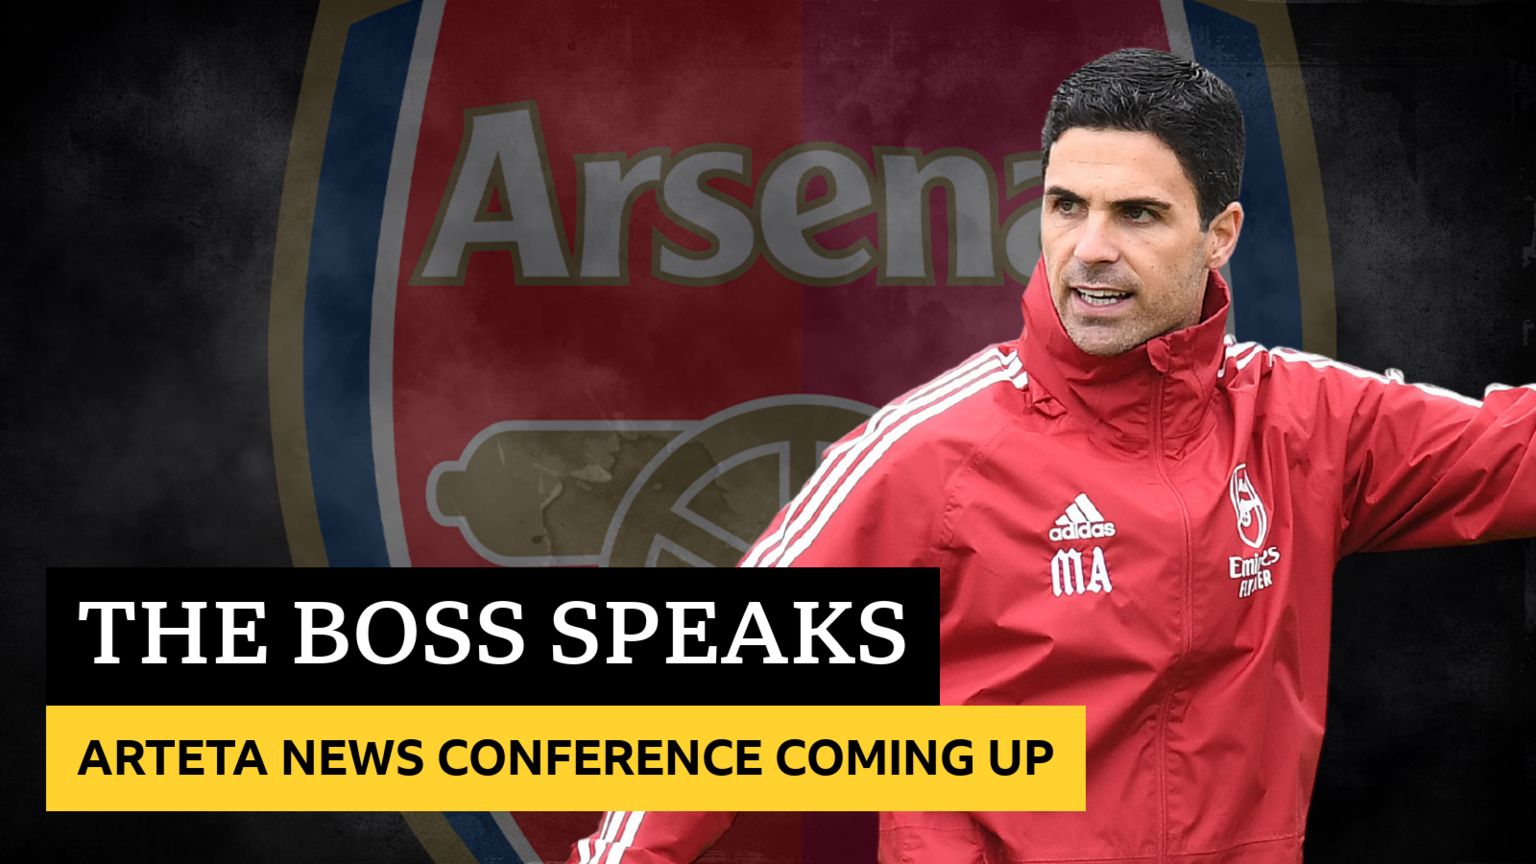 Mikel Arteta Arsenal news conference coming up